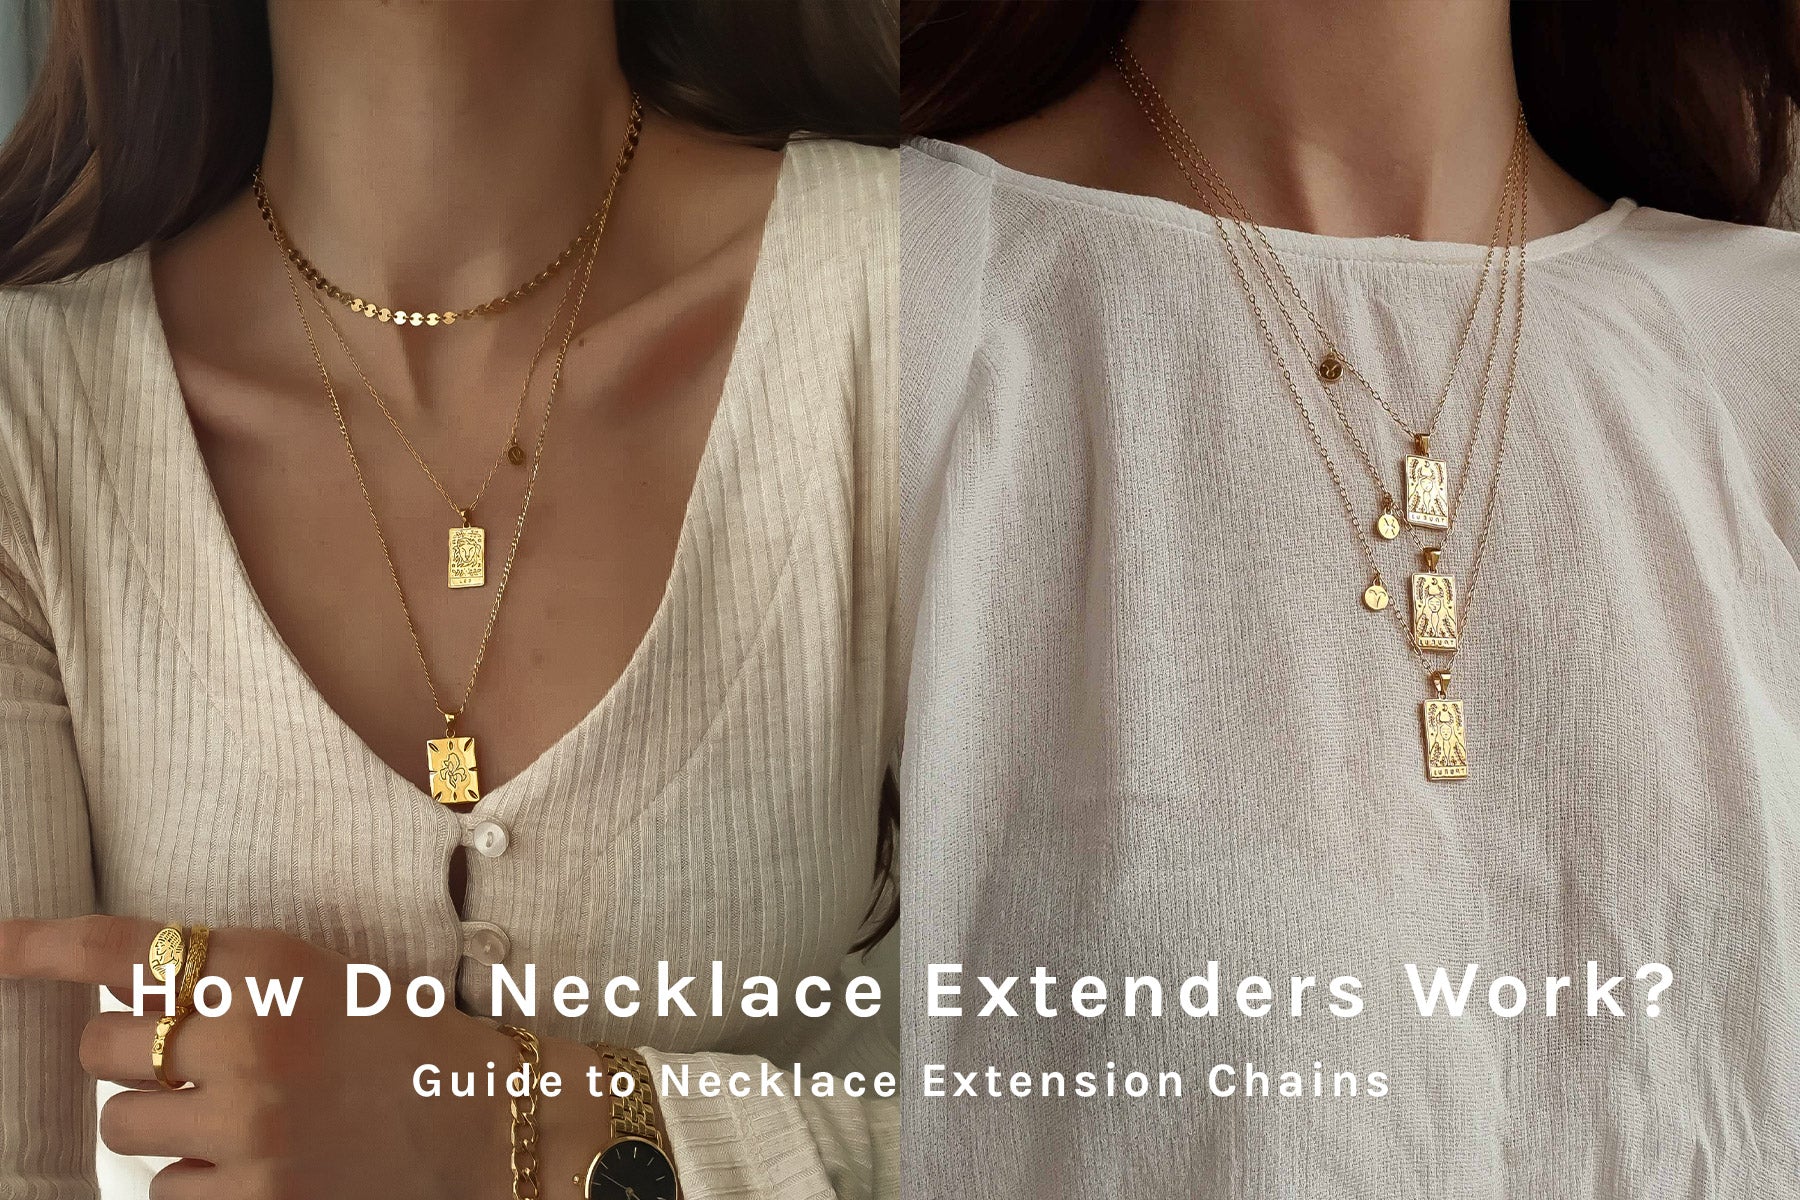 How Do Necklace Extenders Work? Guide to Necklace Extension Chains